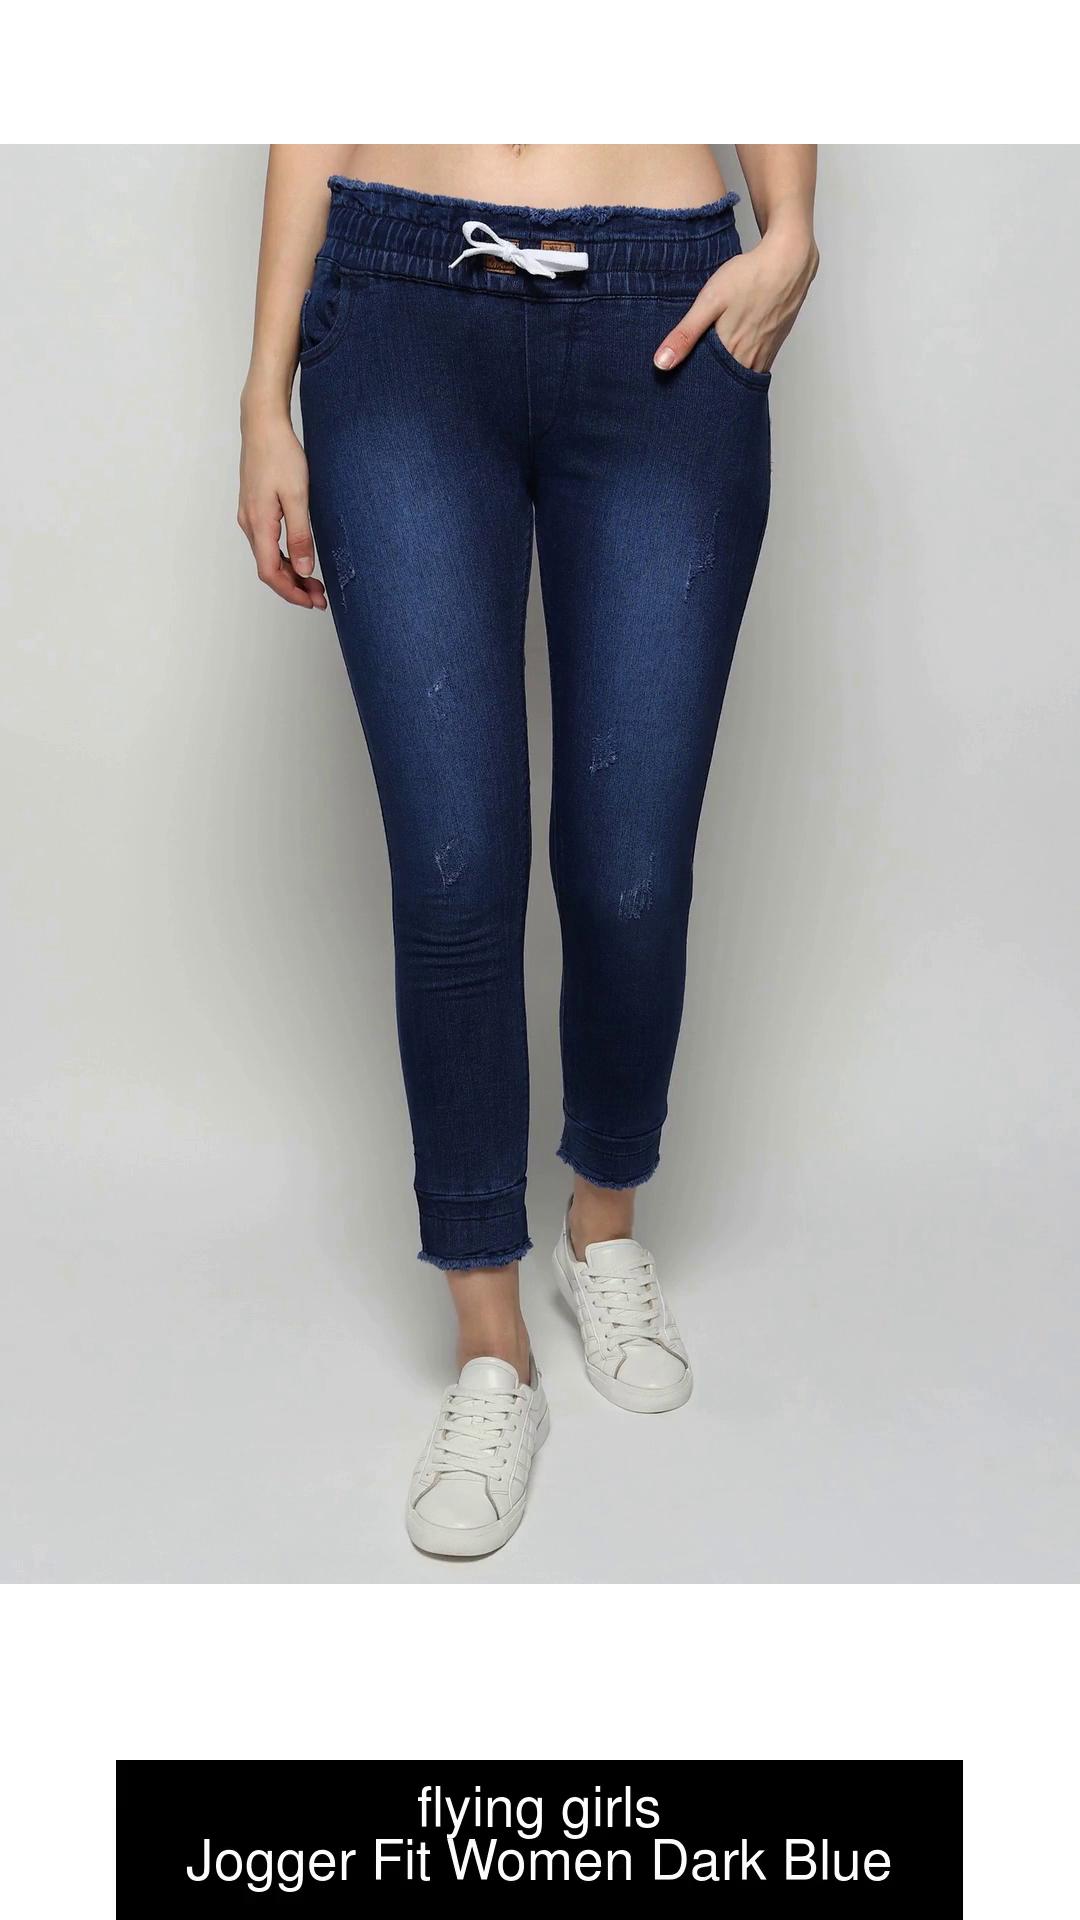 flying girls Jogger Fit Women Dark Blue Jeans - Buy flying girls Jogger Fit  Women Dark Blue Jeans Online at Best Prices in India